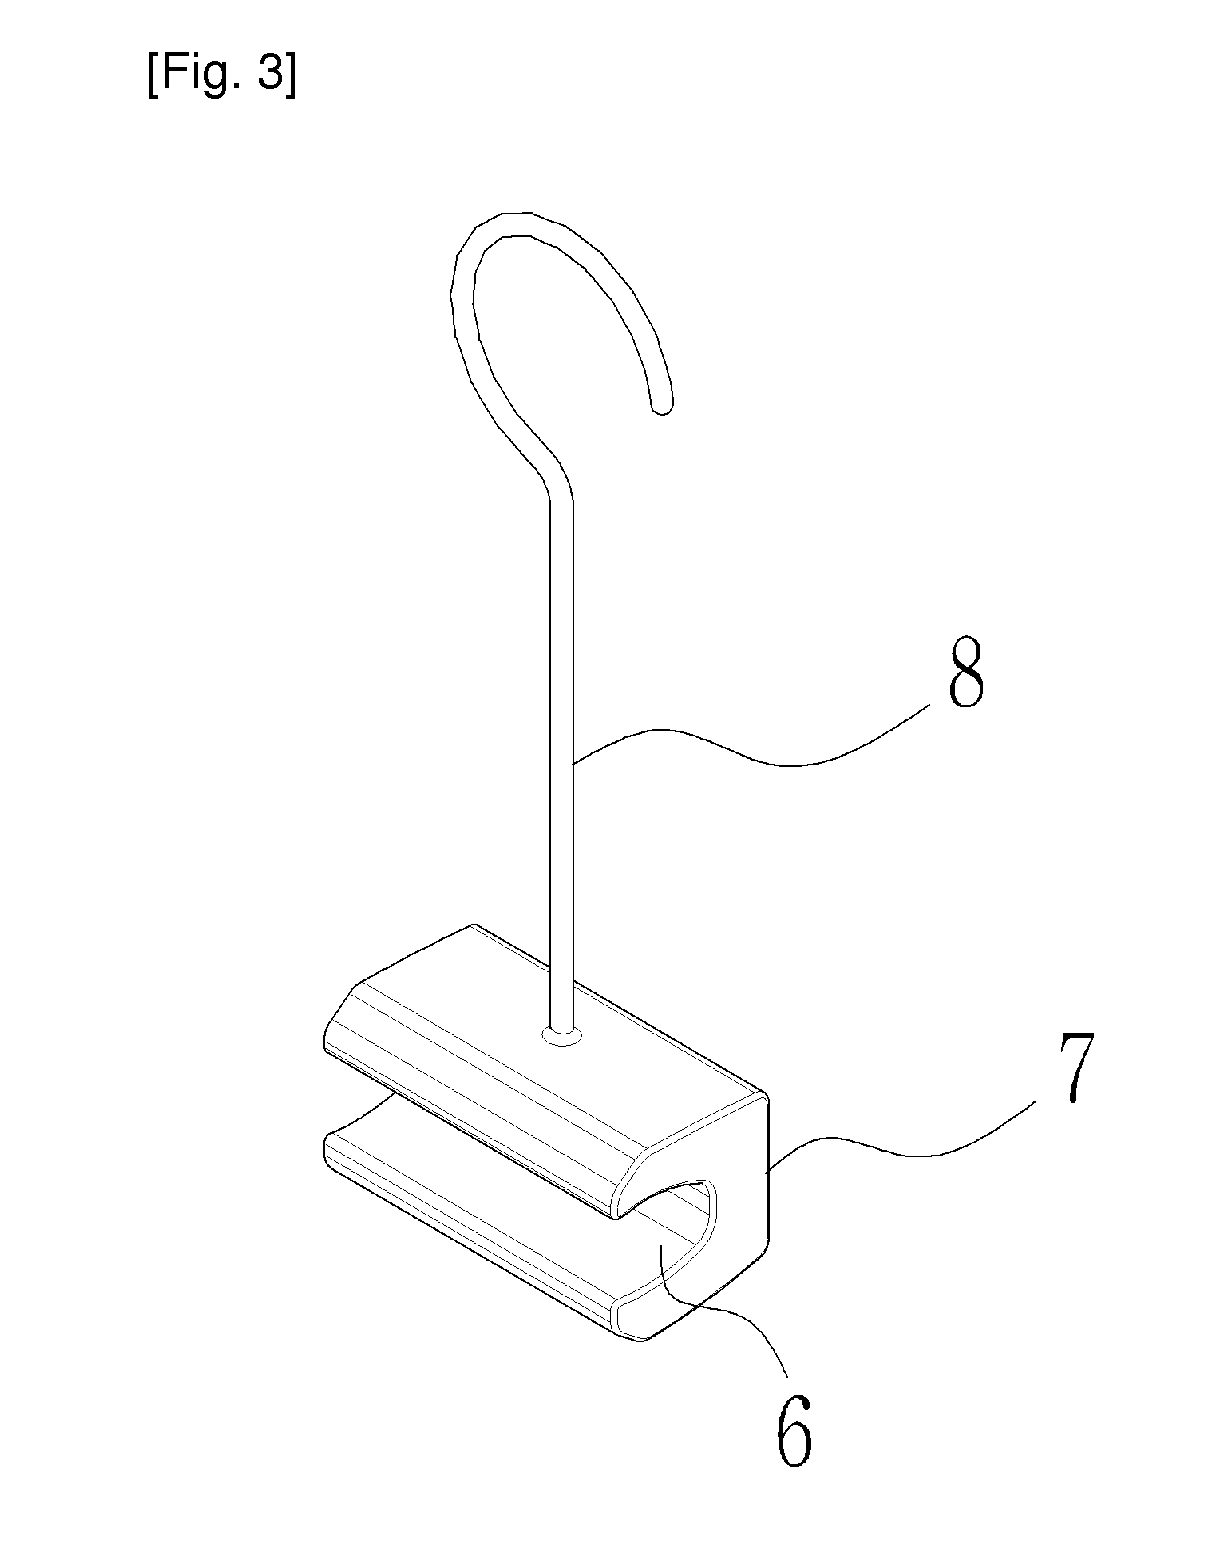 Connection device for surgical operation of straightening irregular teeth